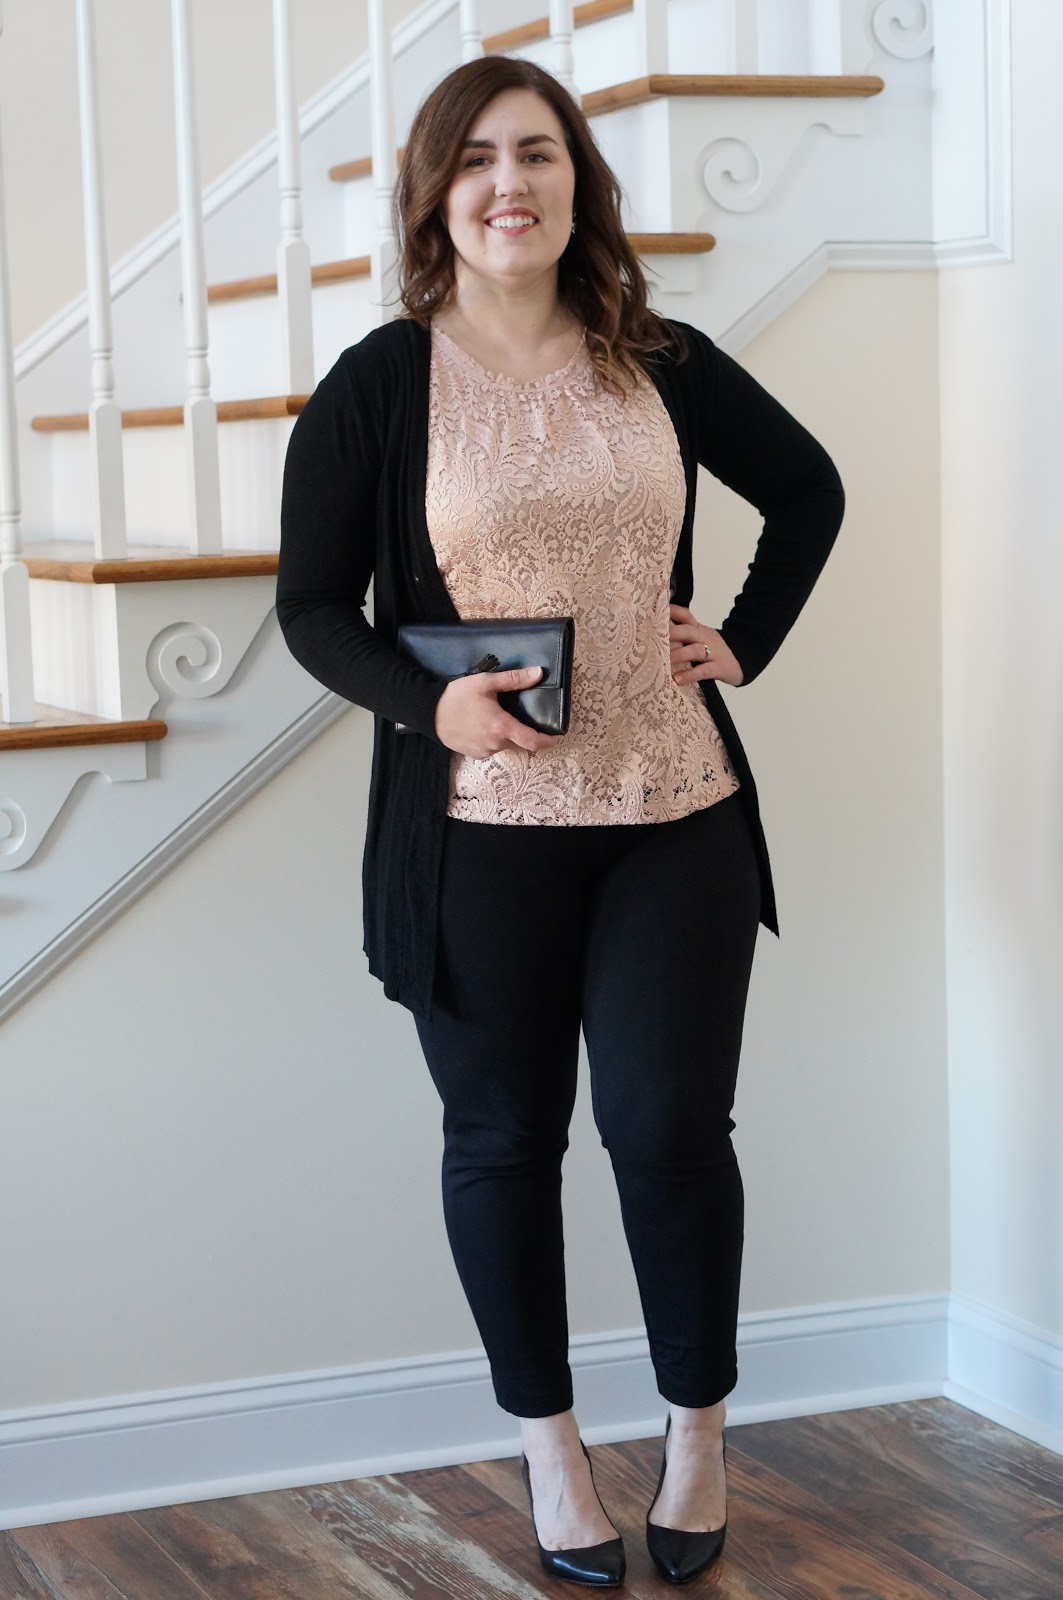 North Carolina style blogger Rebecca Lately shares her Valentine's Day look for work! Check it out here!